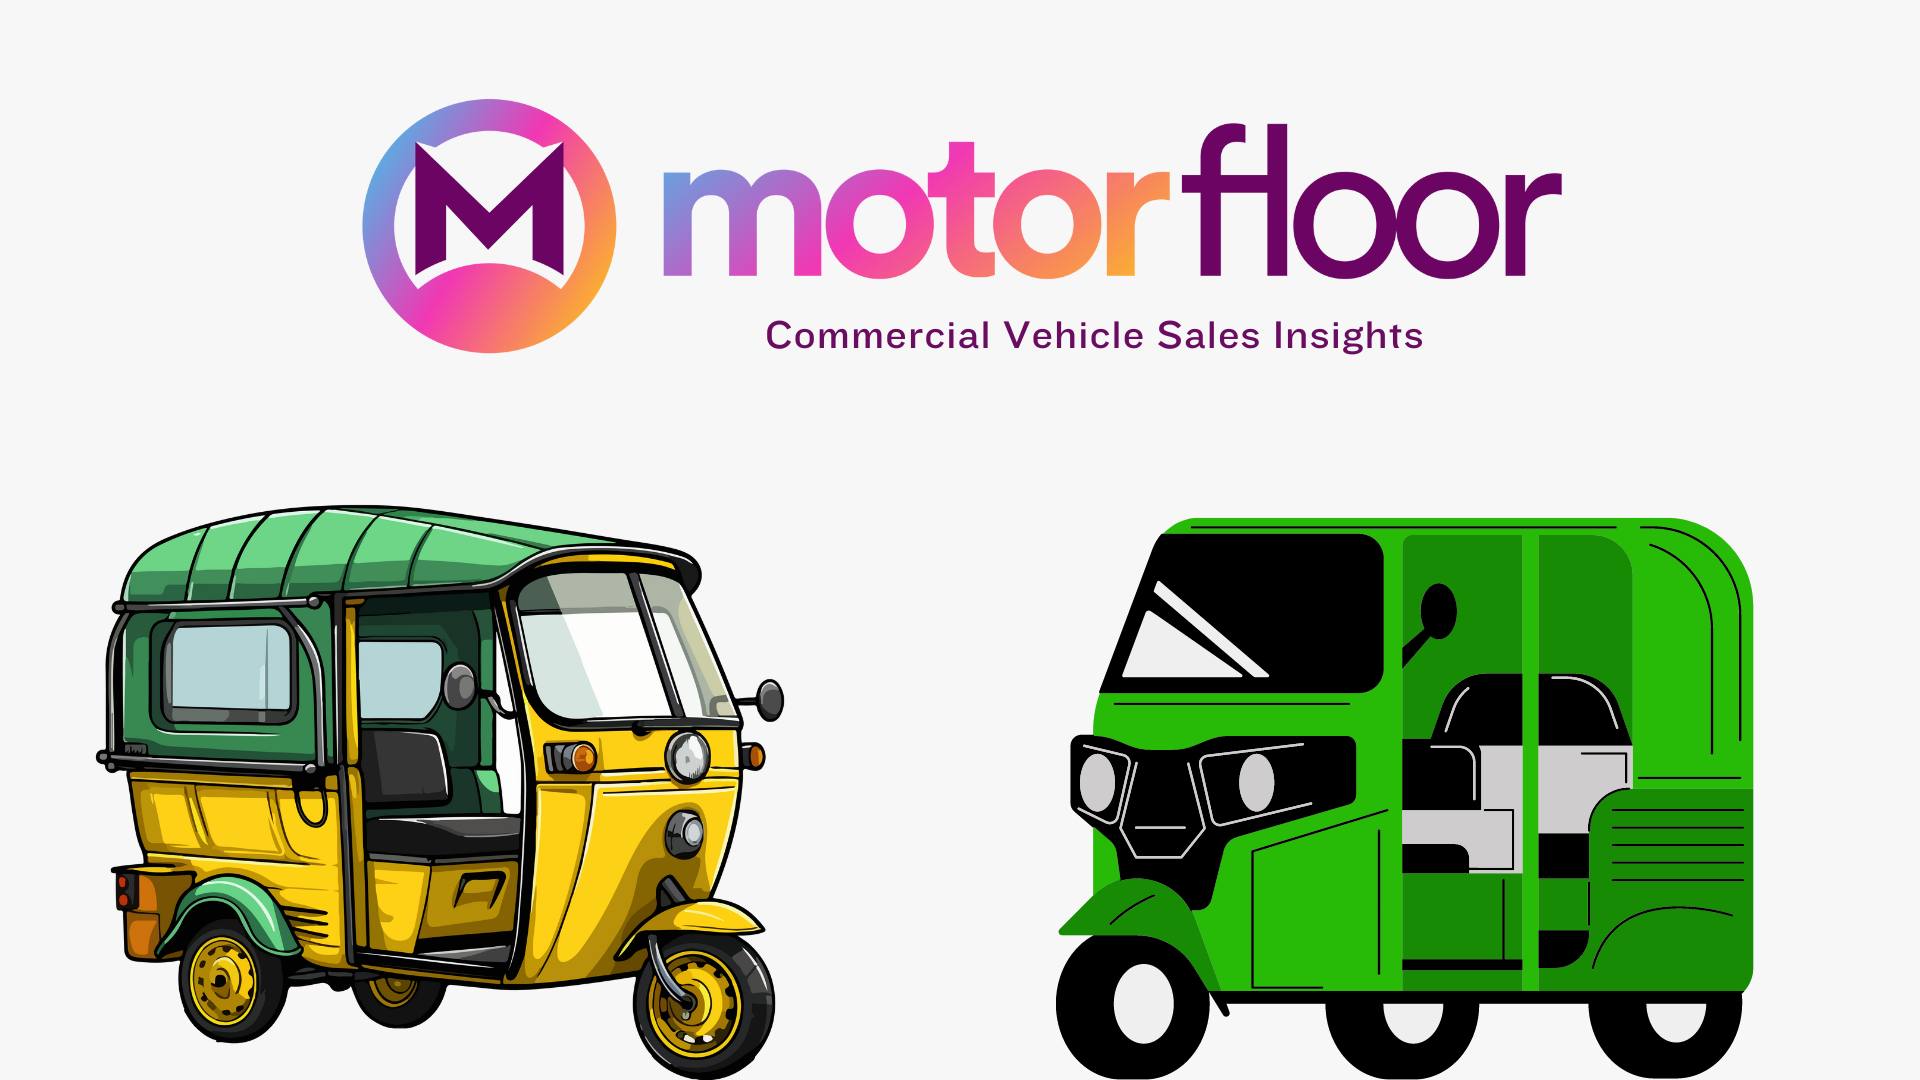 Commercial Vehicle Sales Insights